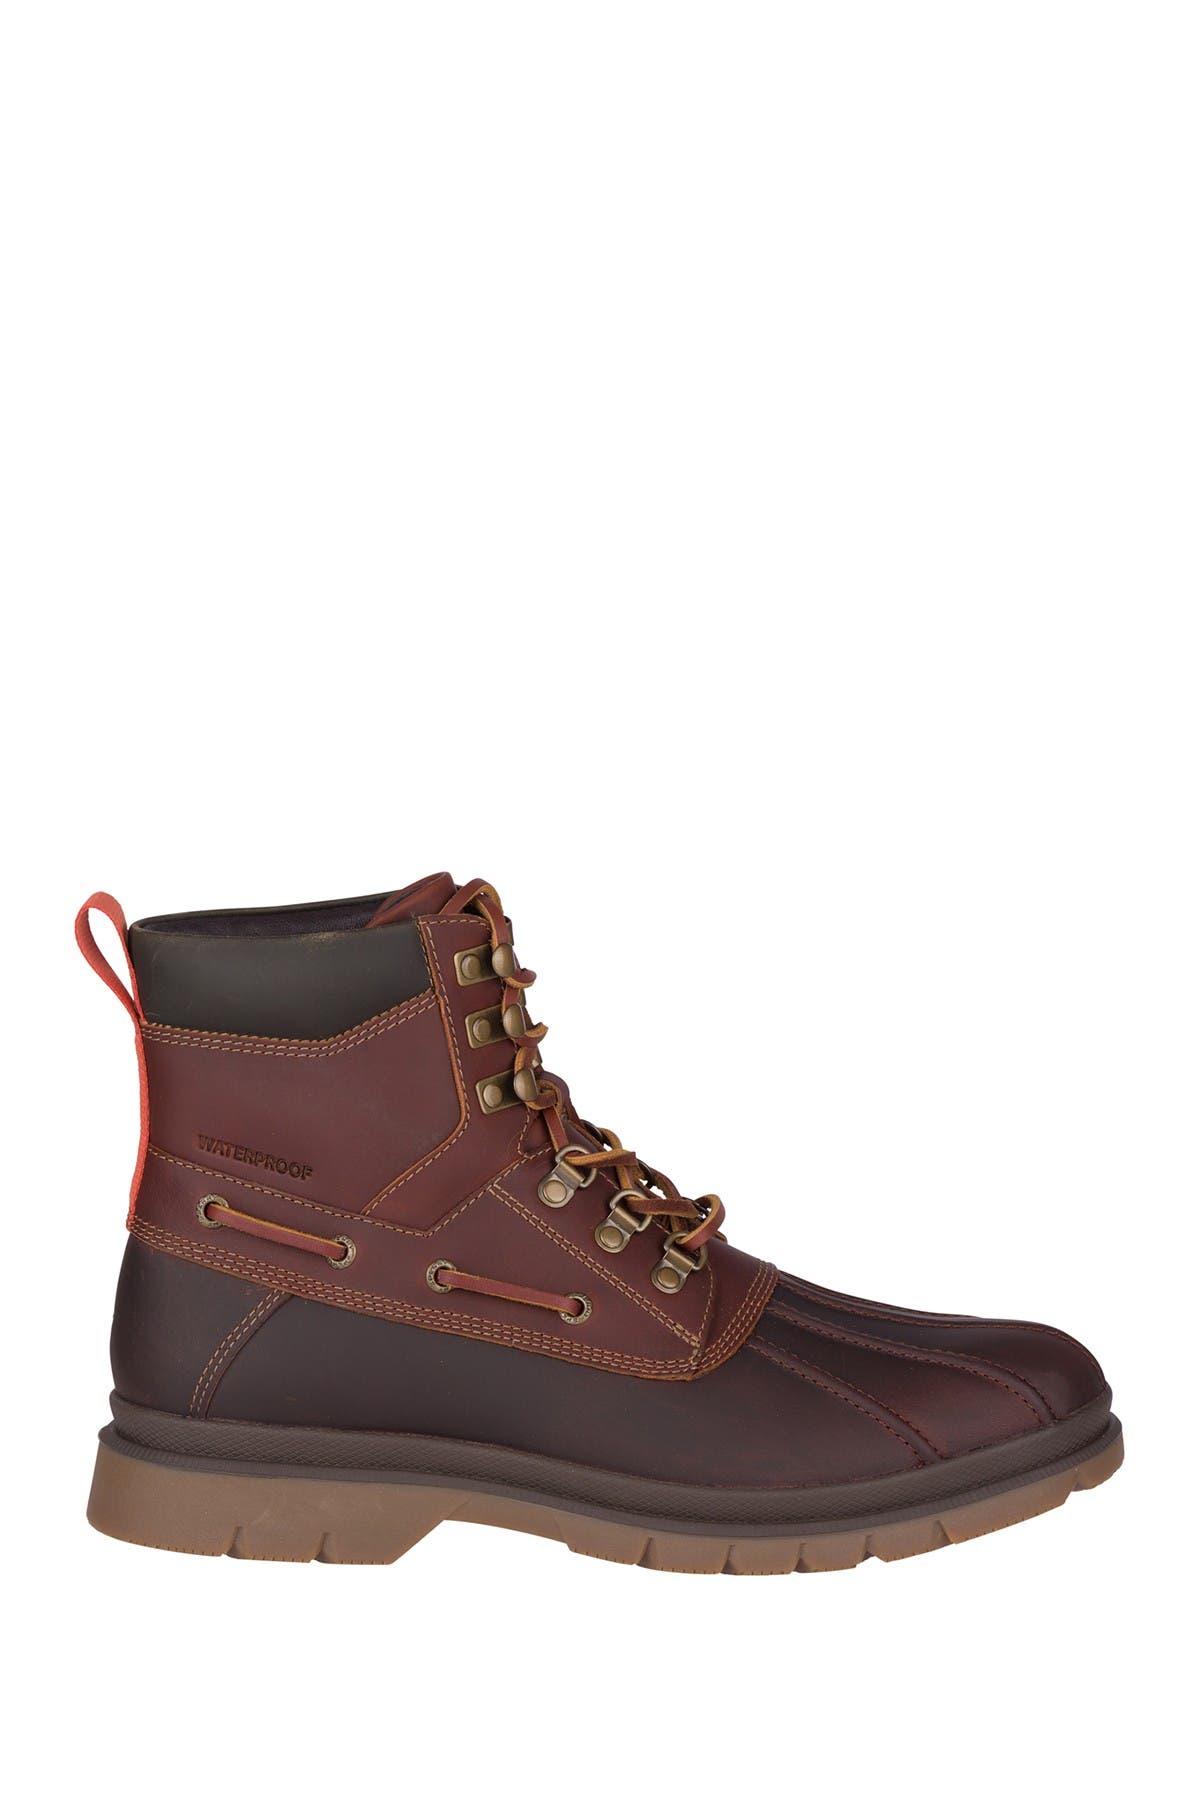 Watertown Waterproof Leather Lace-Up 